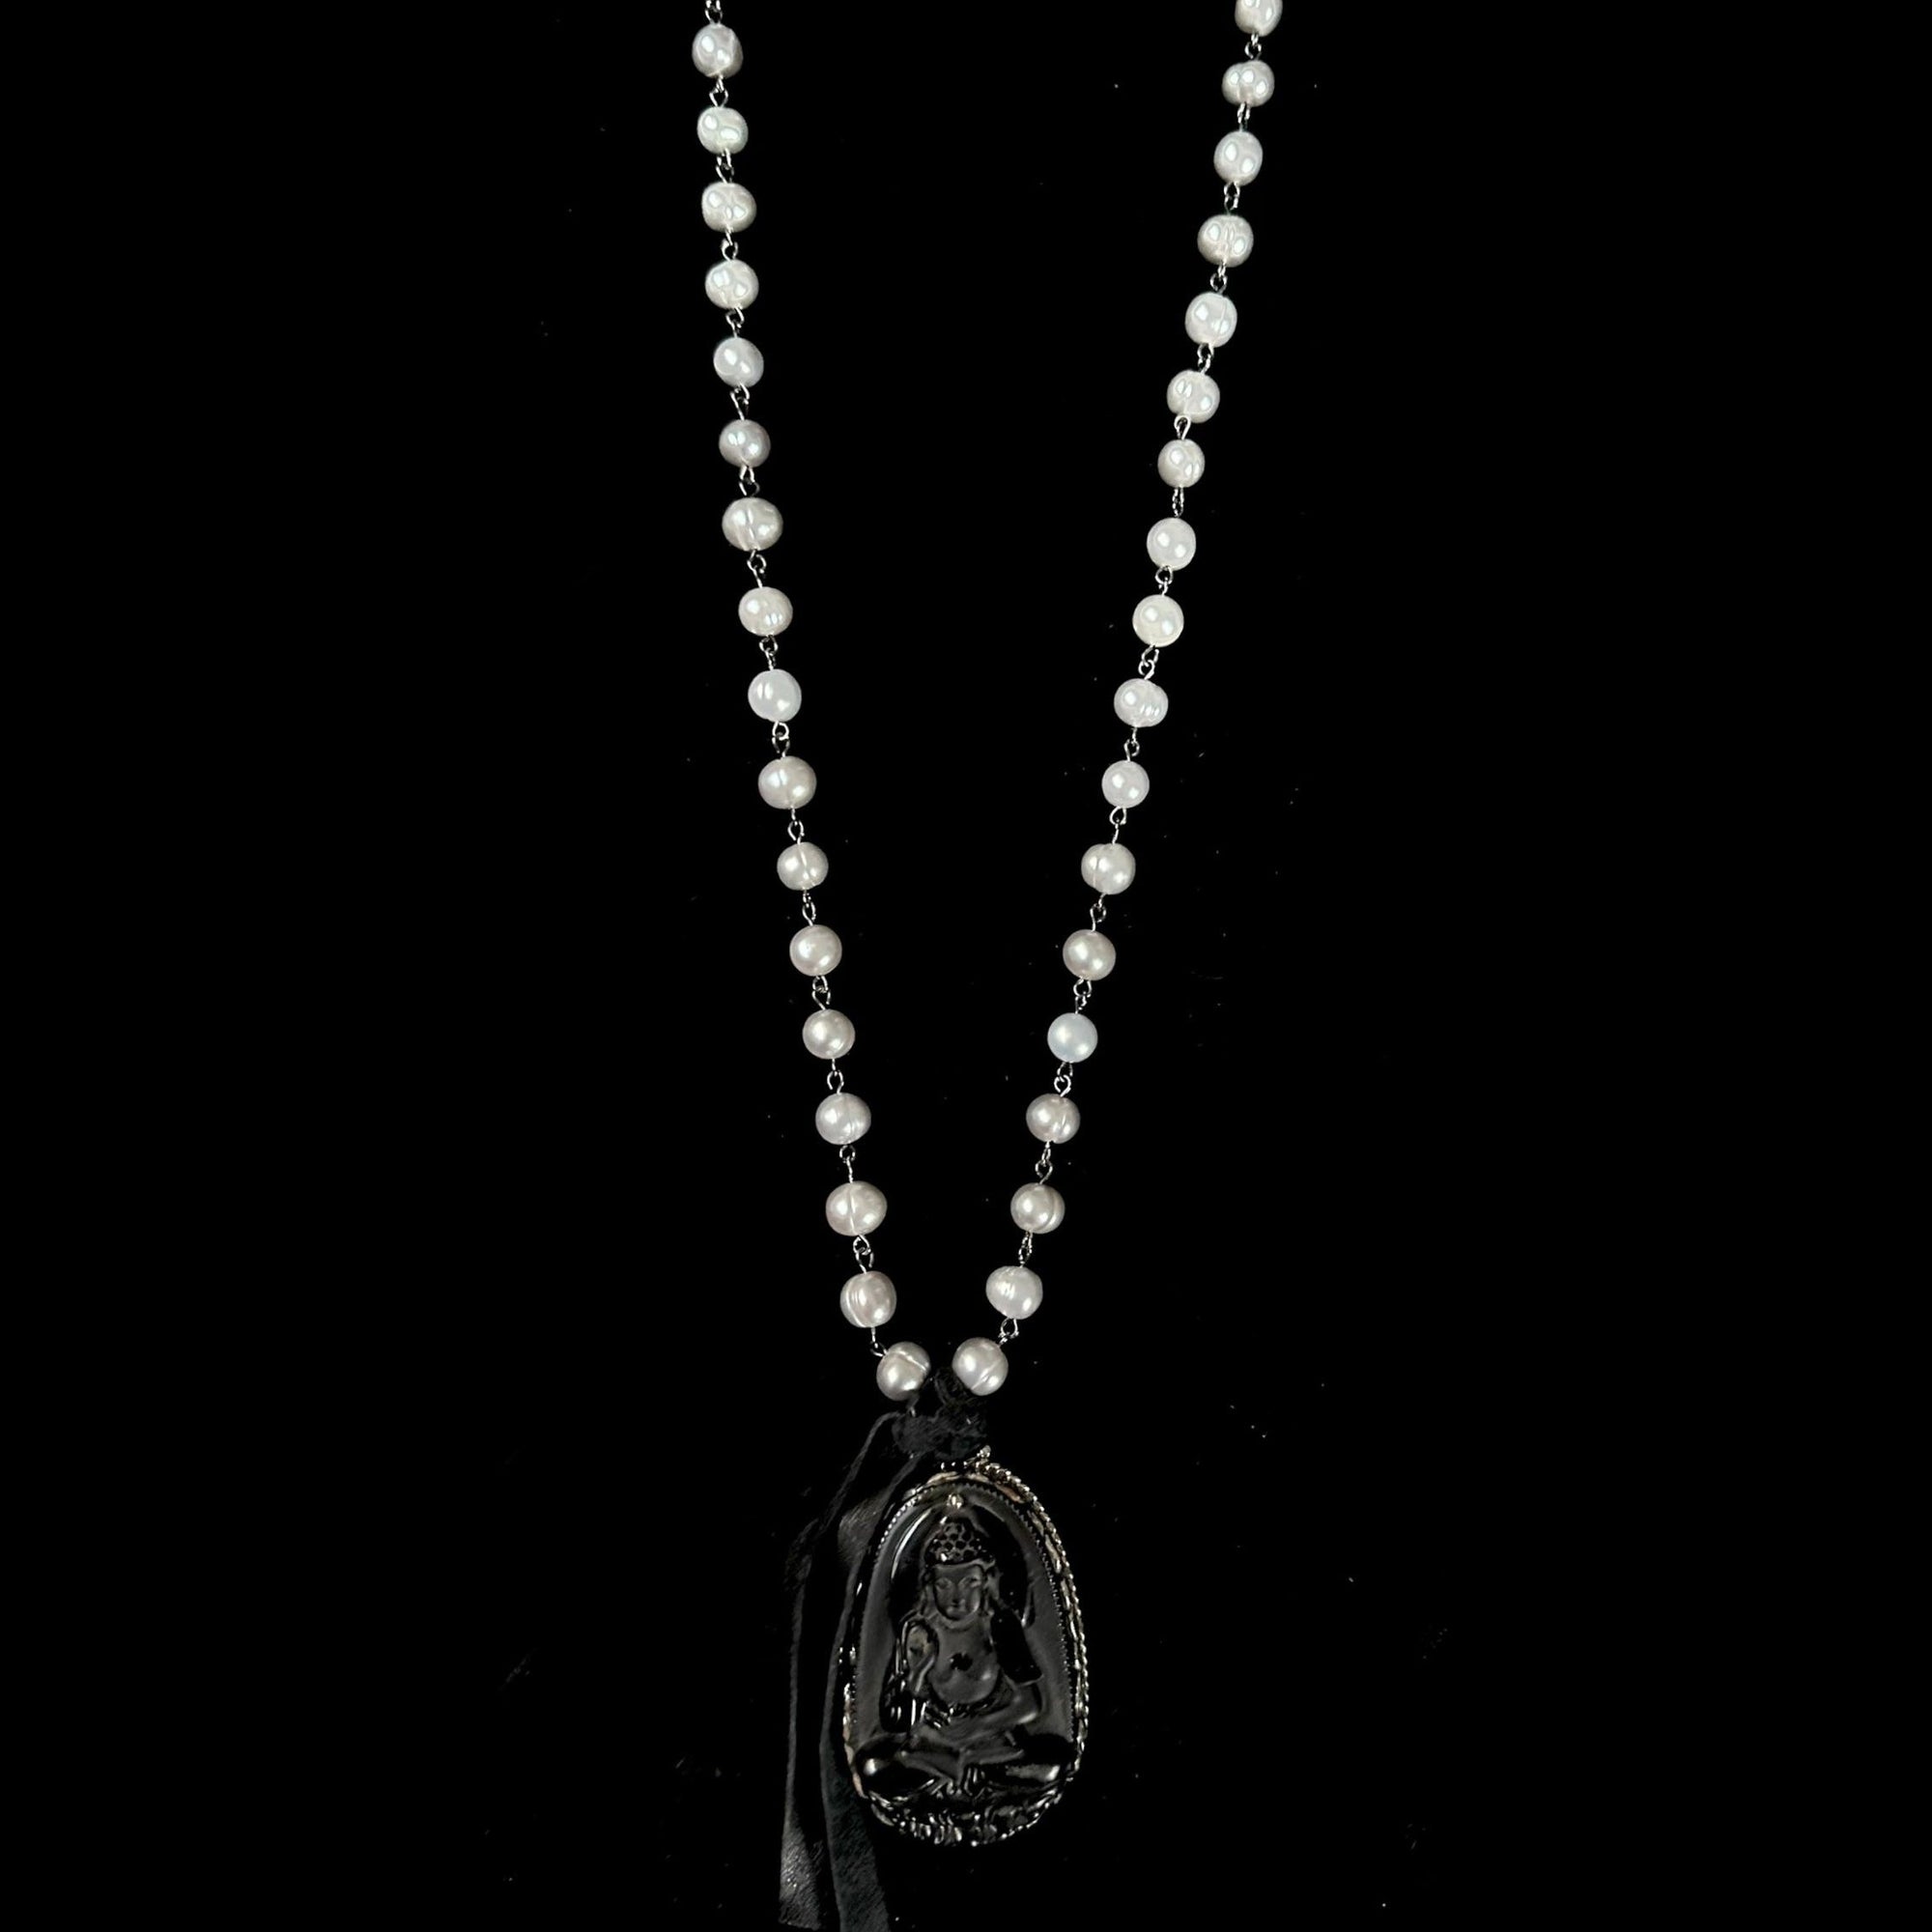 Limited Edition Carved Repousse  Buddha in Black Obsidian & Moonglow Pearl Necklace